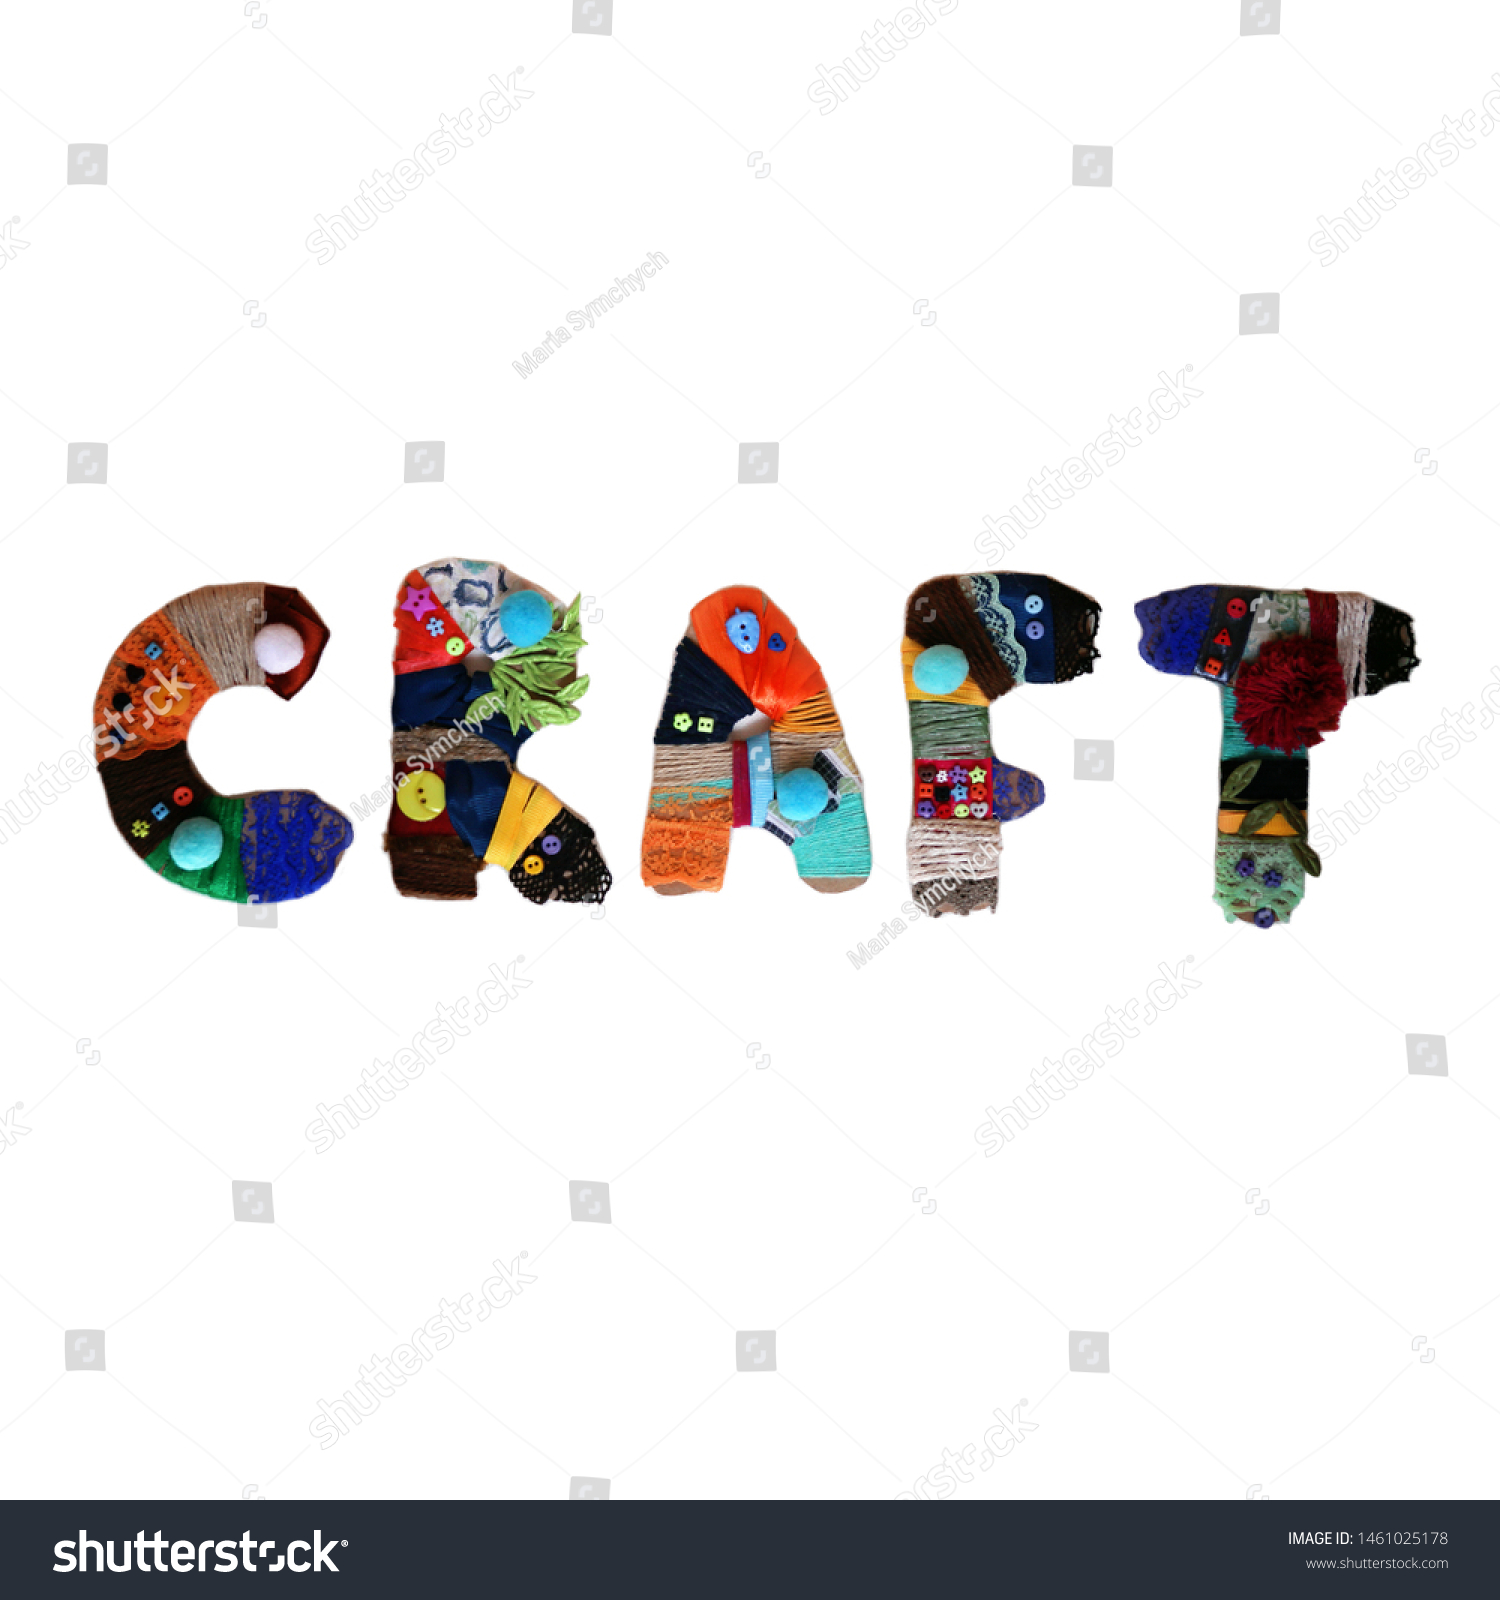 Bright colorful letters made with different ribbons, strings, ropes and cottons, word craft isolated over white background, craft art and handmade hobbies, child creative activities #1461025178